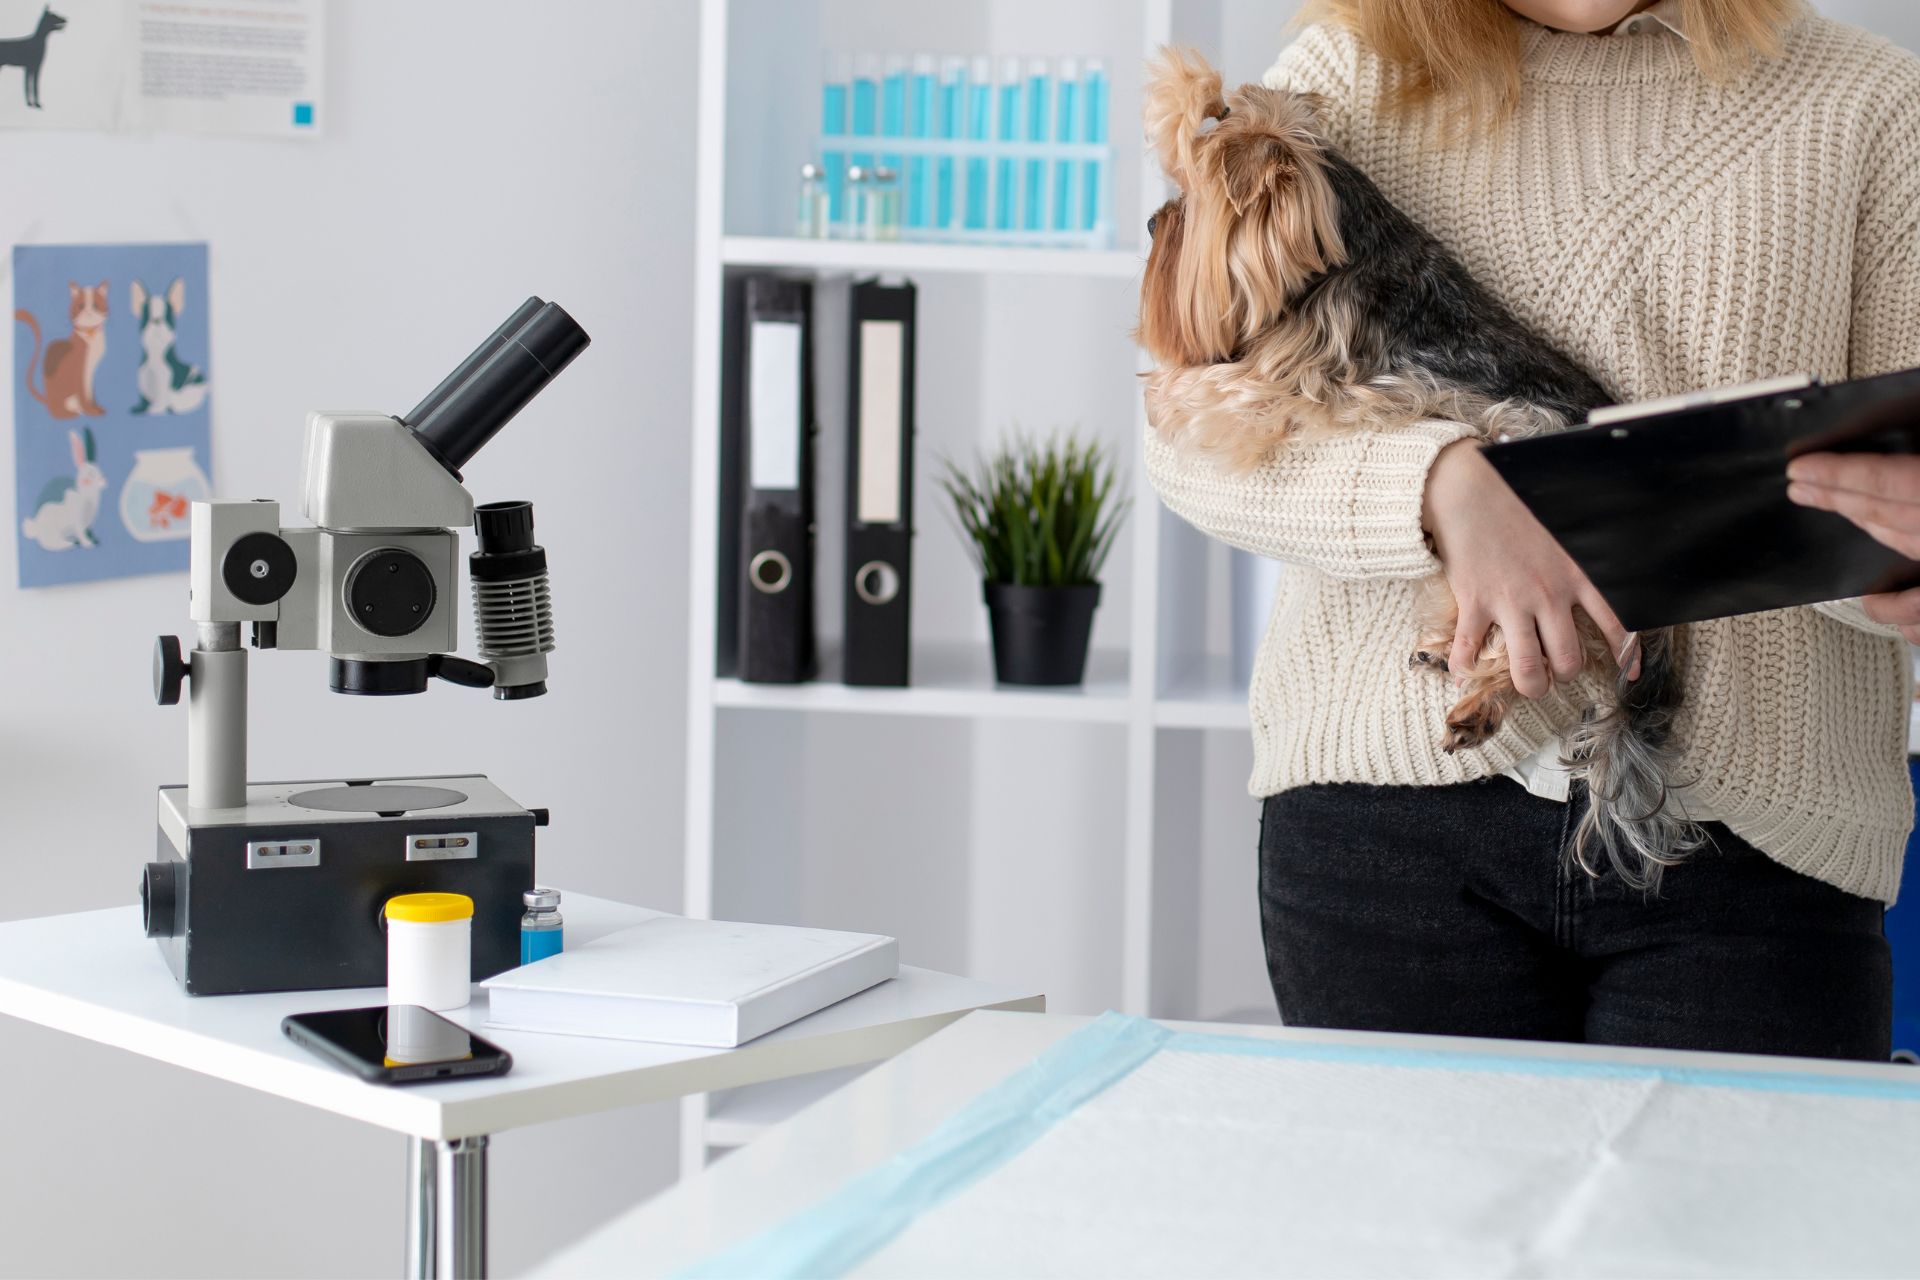 microscope and waman with her dog